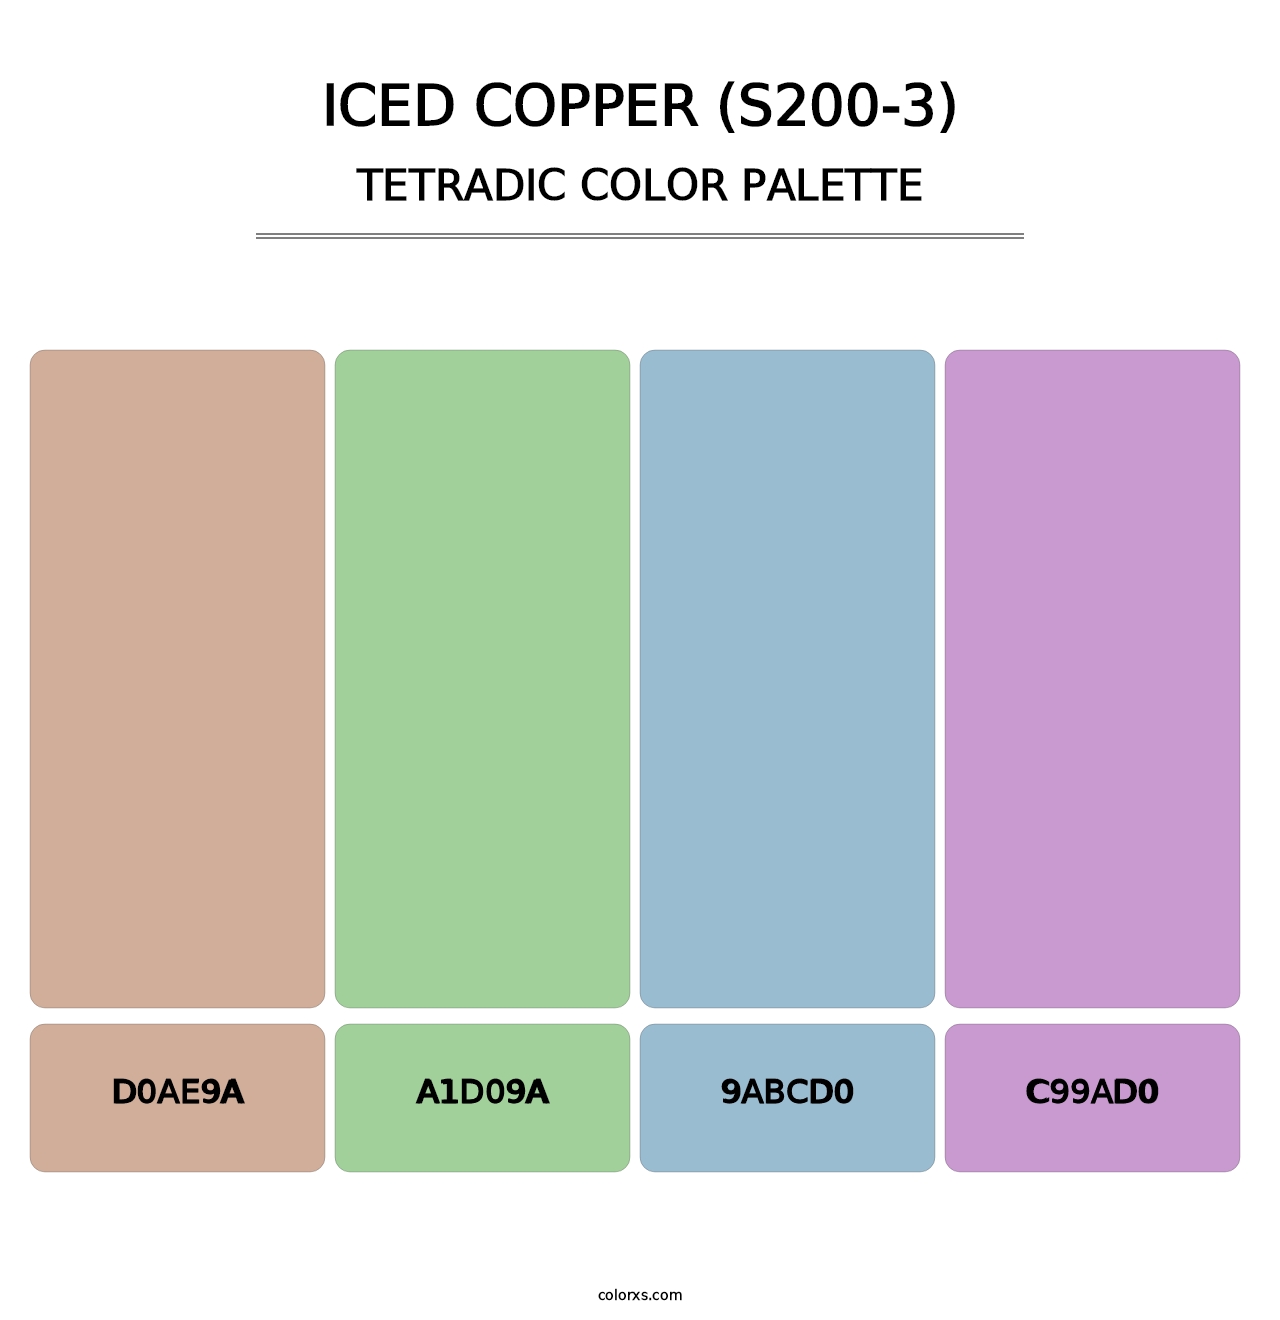 Iced Copper (S200-3) - Tetradic Color Palette